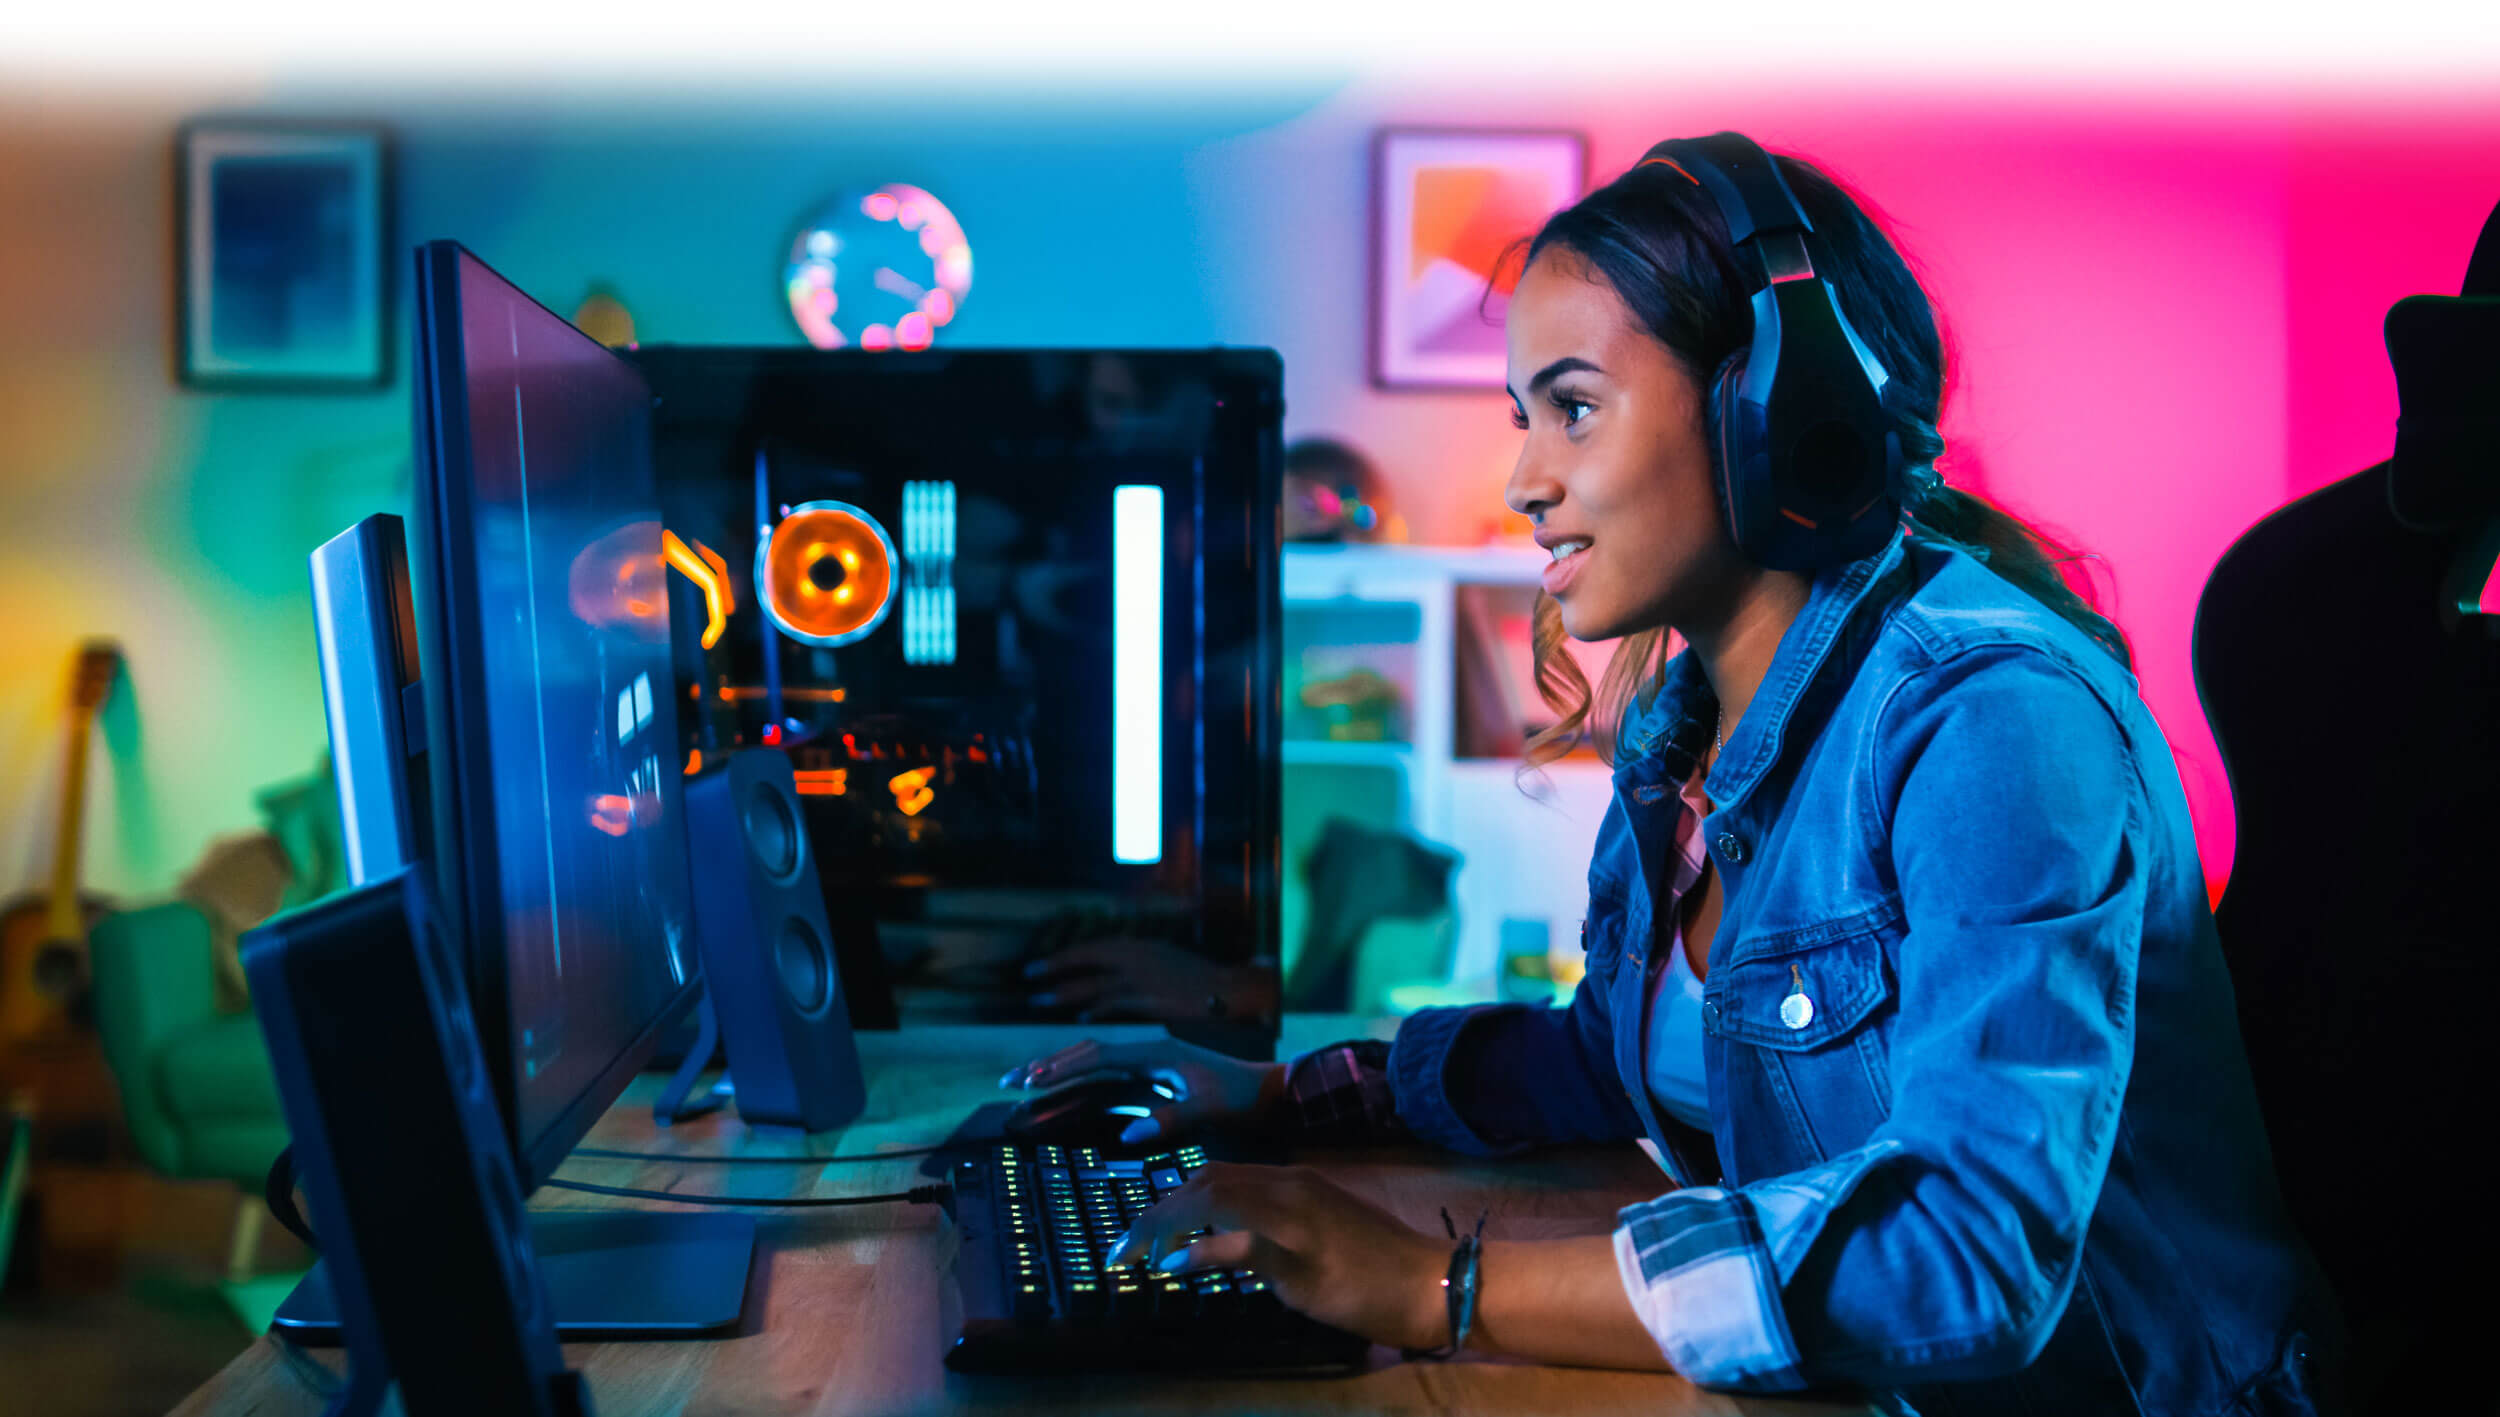 Girl gamer playing video game with high-tech gaming rig with colourful smart home lights in the background